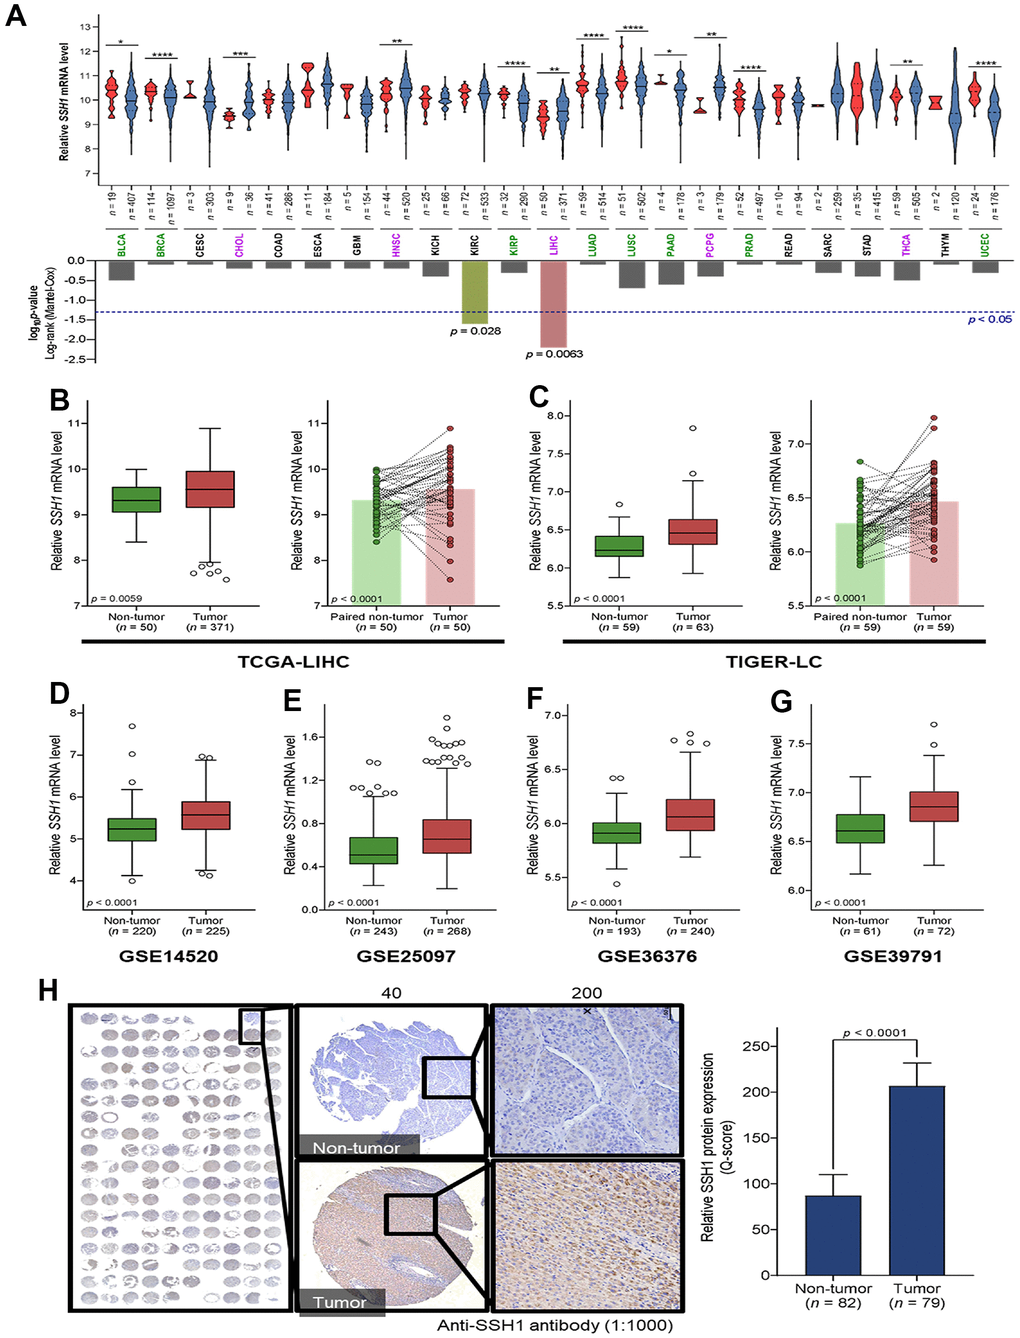 SSH1 is aberrantly expressed in hepatocellular carcinoma (HCC). (A) Violin plots with the graphical representation of the associated Mantel-Cox test showing the differential expression of SSH1 mRNA in 23 cancer types from the TCGA database. (B) Box plots of the relative SSH1 mRNA expression levels in the general non-tumor and tumor cases (left) or in paired non-tumor-tumor cases (right) of the TCGA-LIHC cohort. (C) Box plots of the relative SSH1 mRNA expression levels in the general non-tumor and tumor cases (left) or in paired non-tumor-tumor cases (right) of the TIGER-LC cohort. Box plots showing the relative SSH1 mRNA expression levels in non-tumor and tumor cases from the (D) GSE14520, (E) GSE25097, (F) GSE36376, and (G) GSE39791 HCC cohorts. (H) Representative IHC staining of HCC tissue microarray and histogram showing the protein expression of SHH1 in tumor and non-tumor based on the Q-score. *p p p 